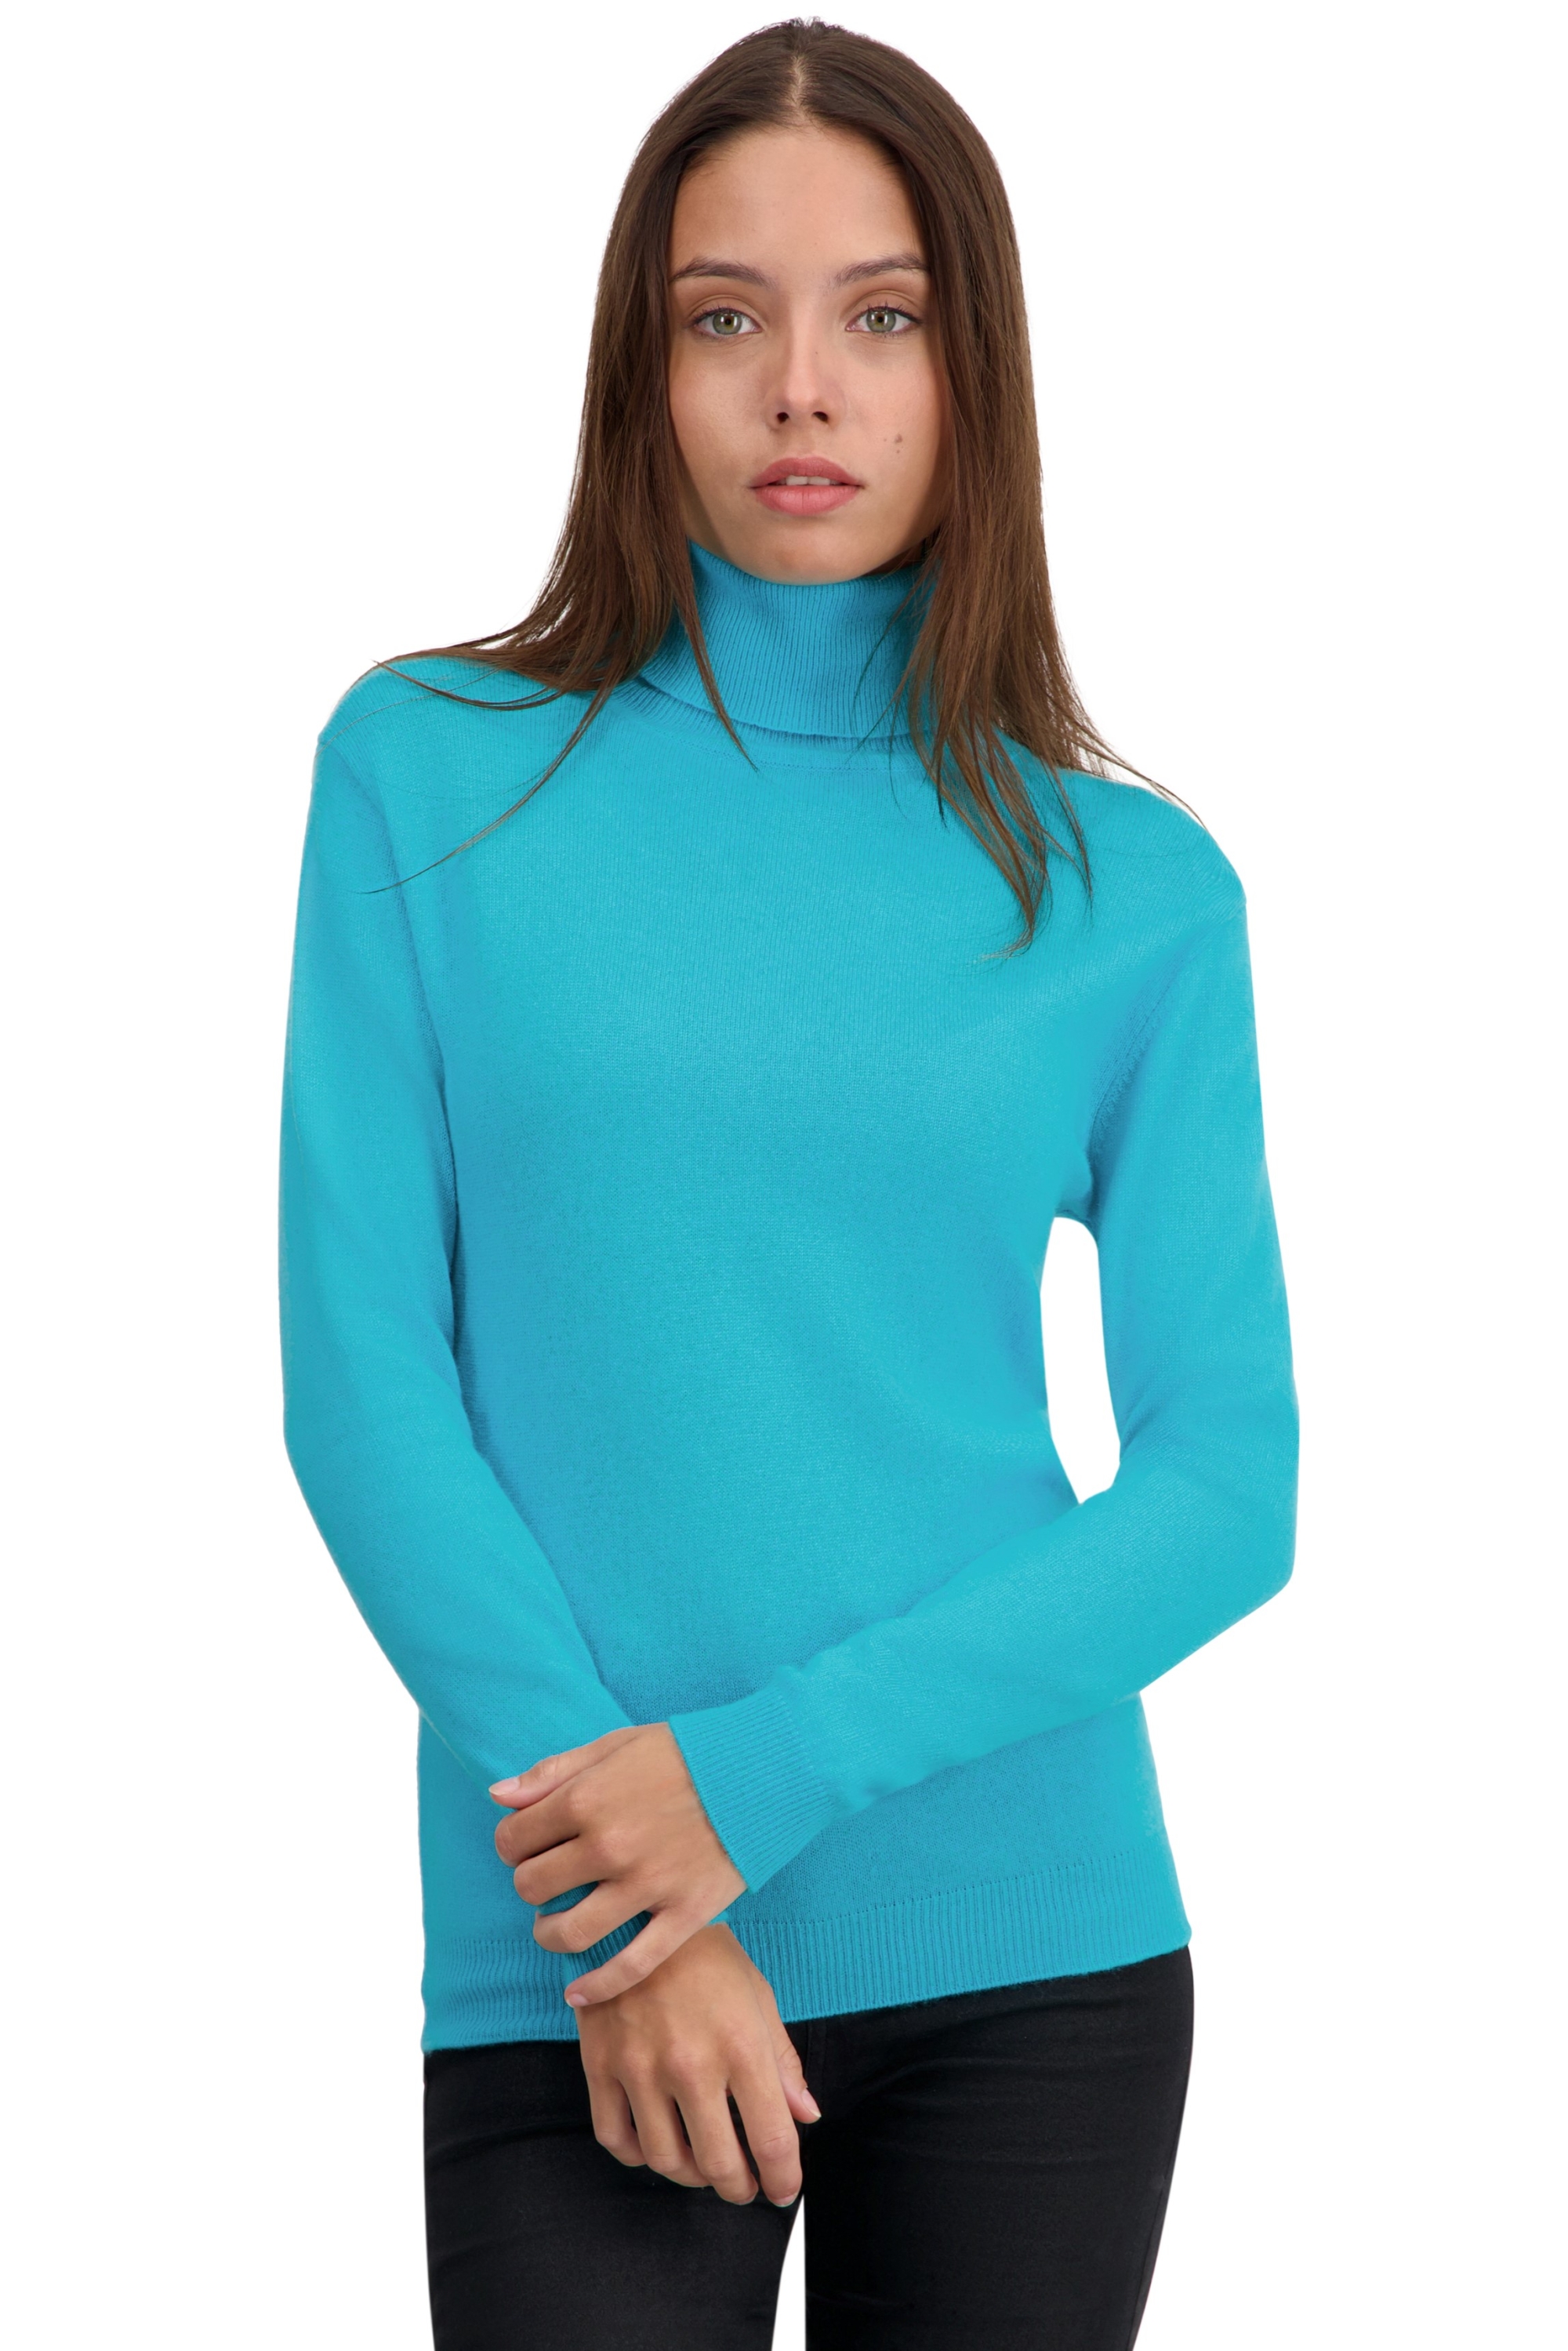 Cashmere ladies tale first kingfisher xs